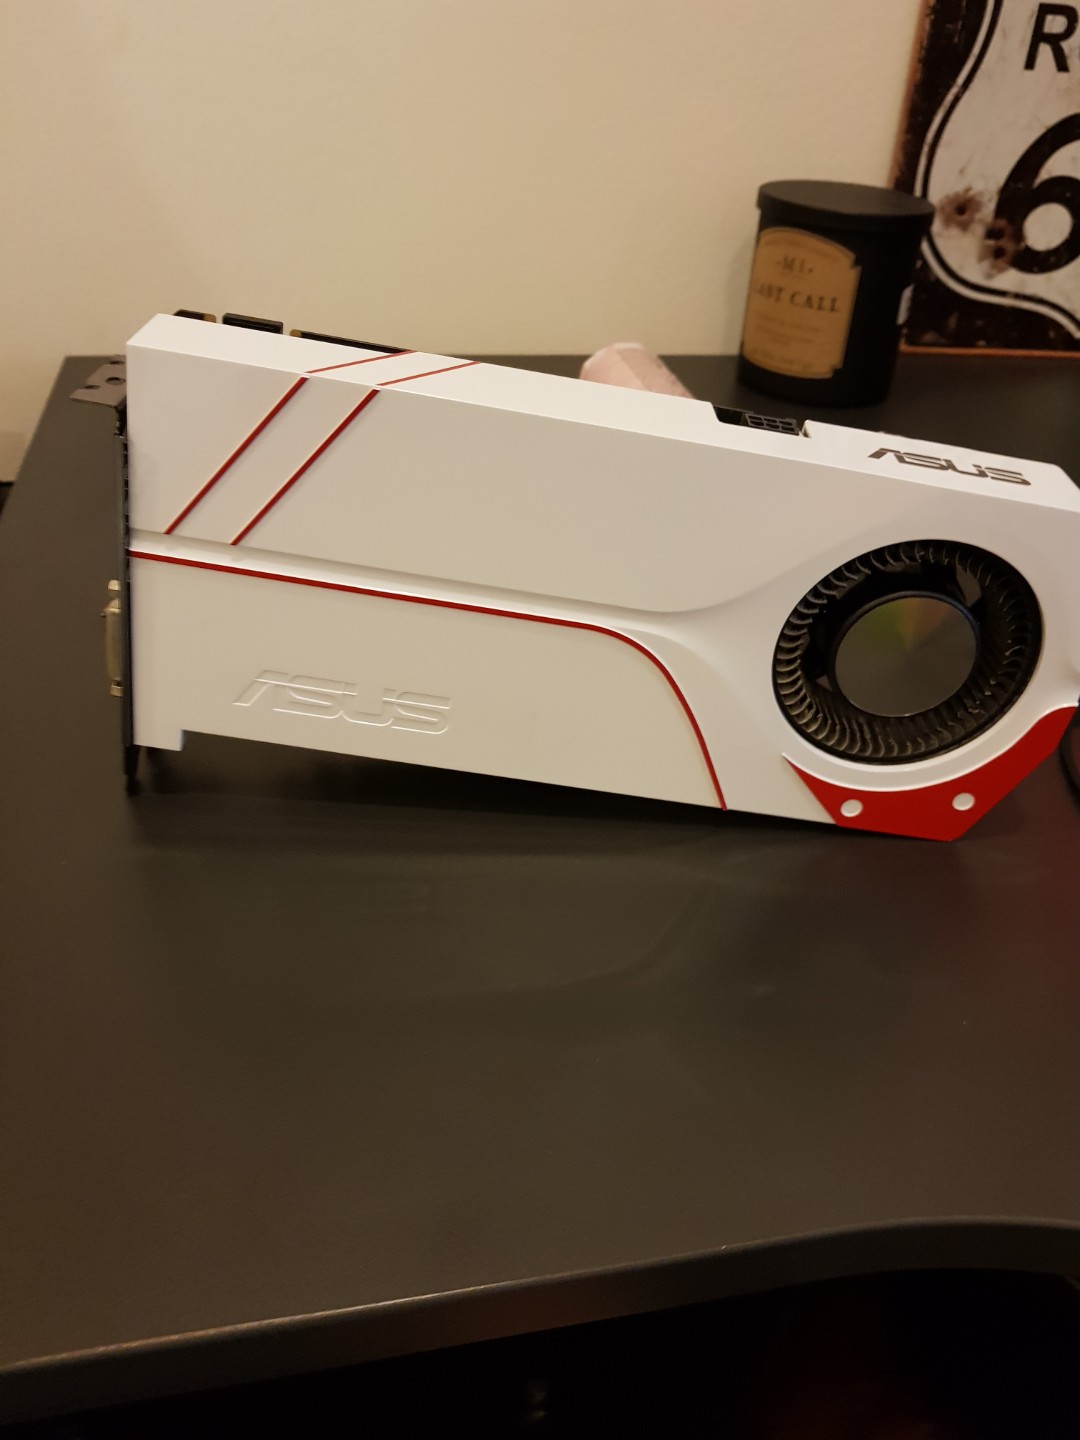 Asus Gtx 960 Turbo Oc 2gb Electronics Computer Parts Accessories On Carousell